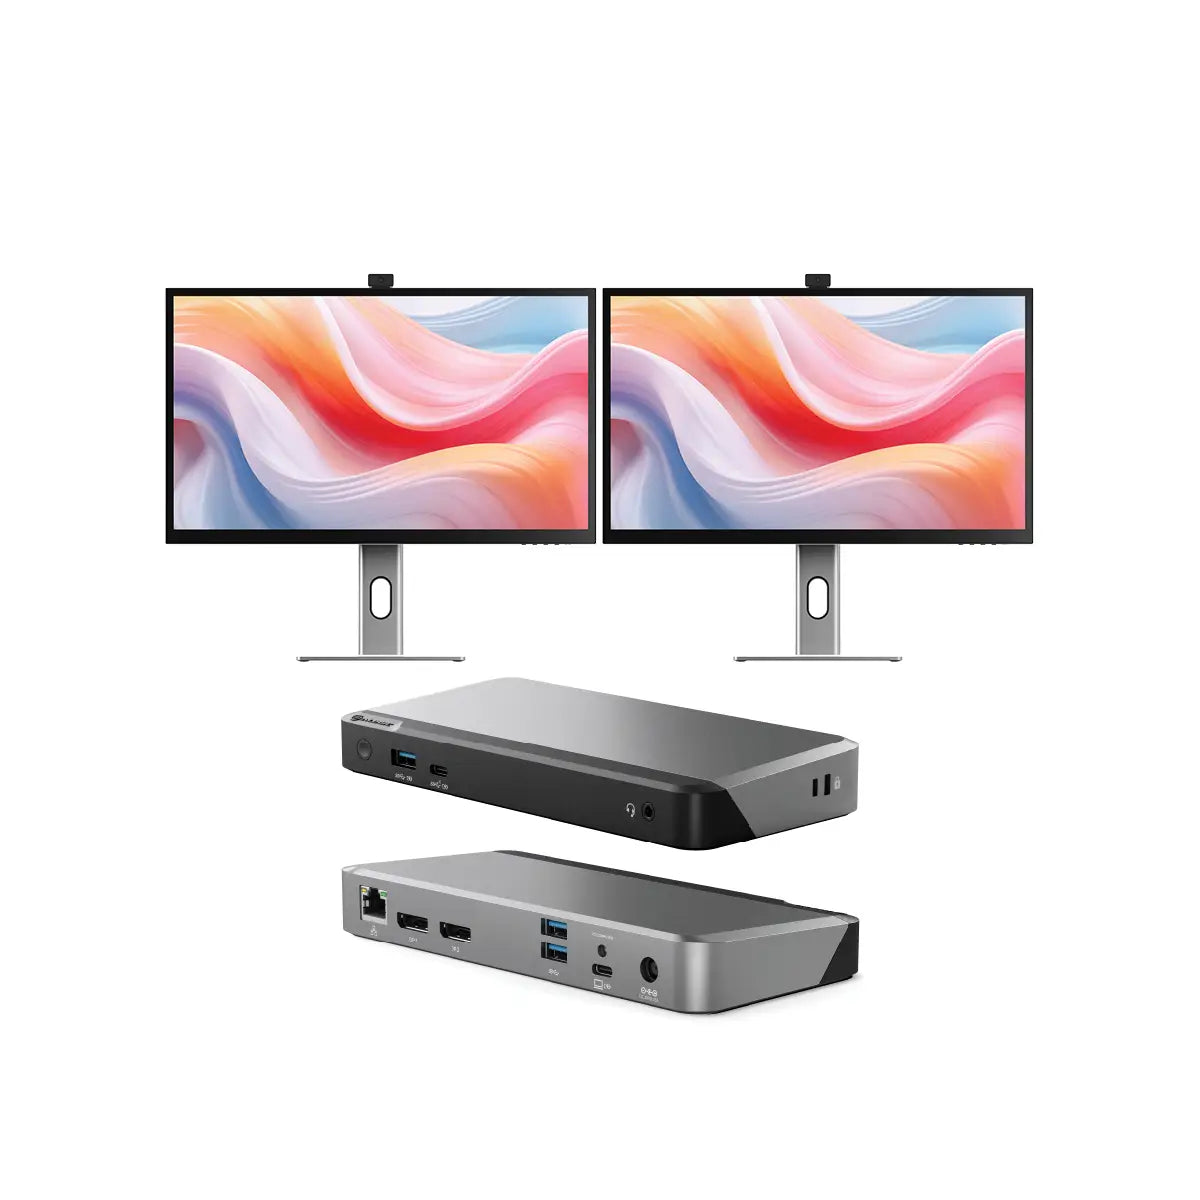 clarity-pro-27-uhd-4k-monitor-with-65w-pd-and-webcam-pack-of-2-dx2-dual-4k-display-universal-docking-station-with-65w-power-delivery1